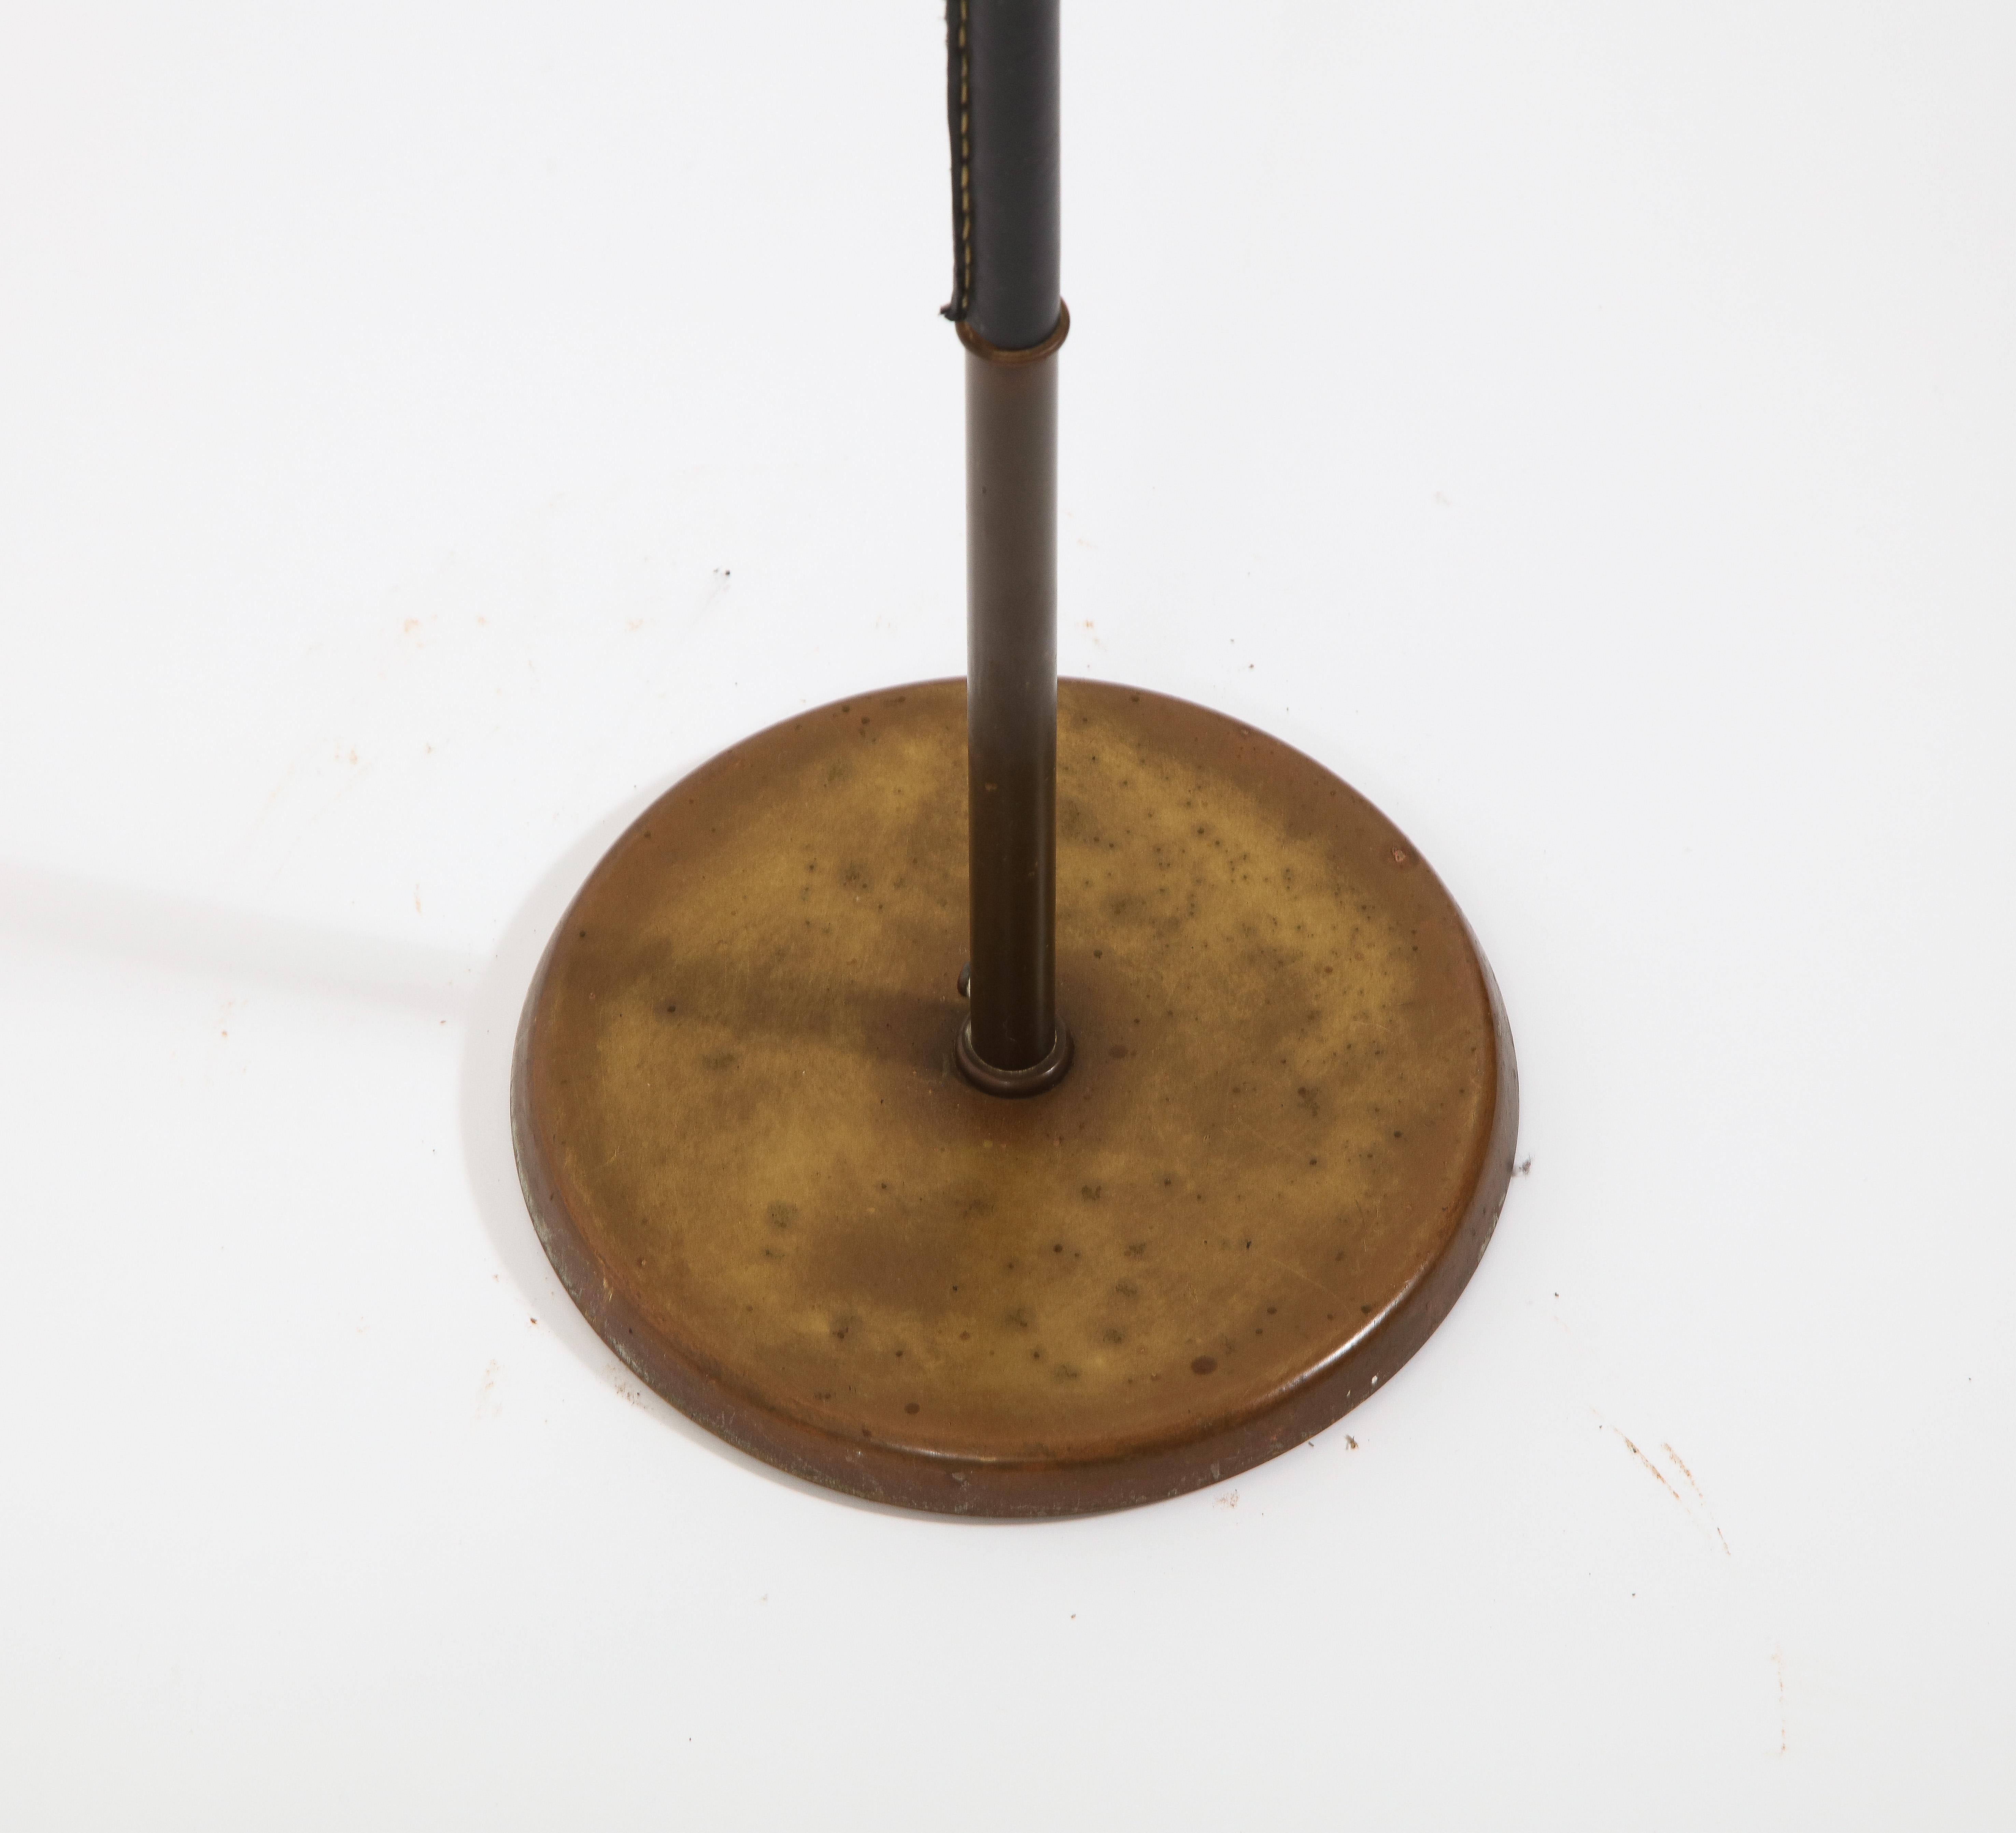 Minimal standing brass lamp with a leather-wrapped stem. Original patina. Shade is for photographic purposes.